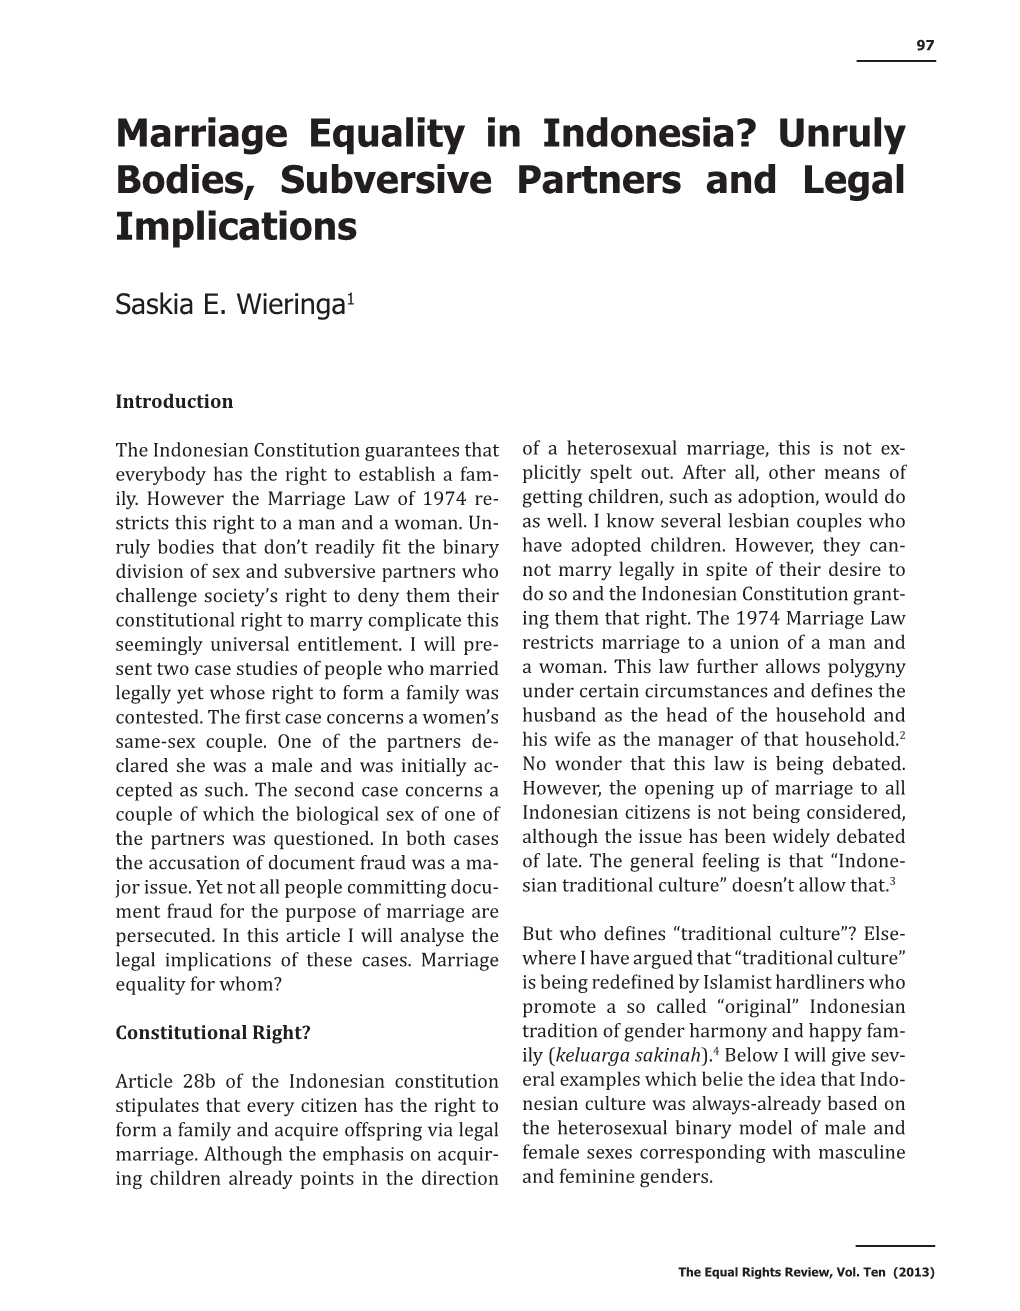 Marriage Equality in Indonesia? Unruly Bodies, Subversive Partners and Legal Implications